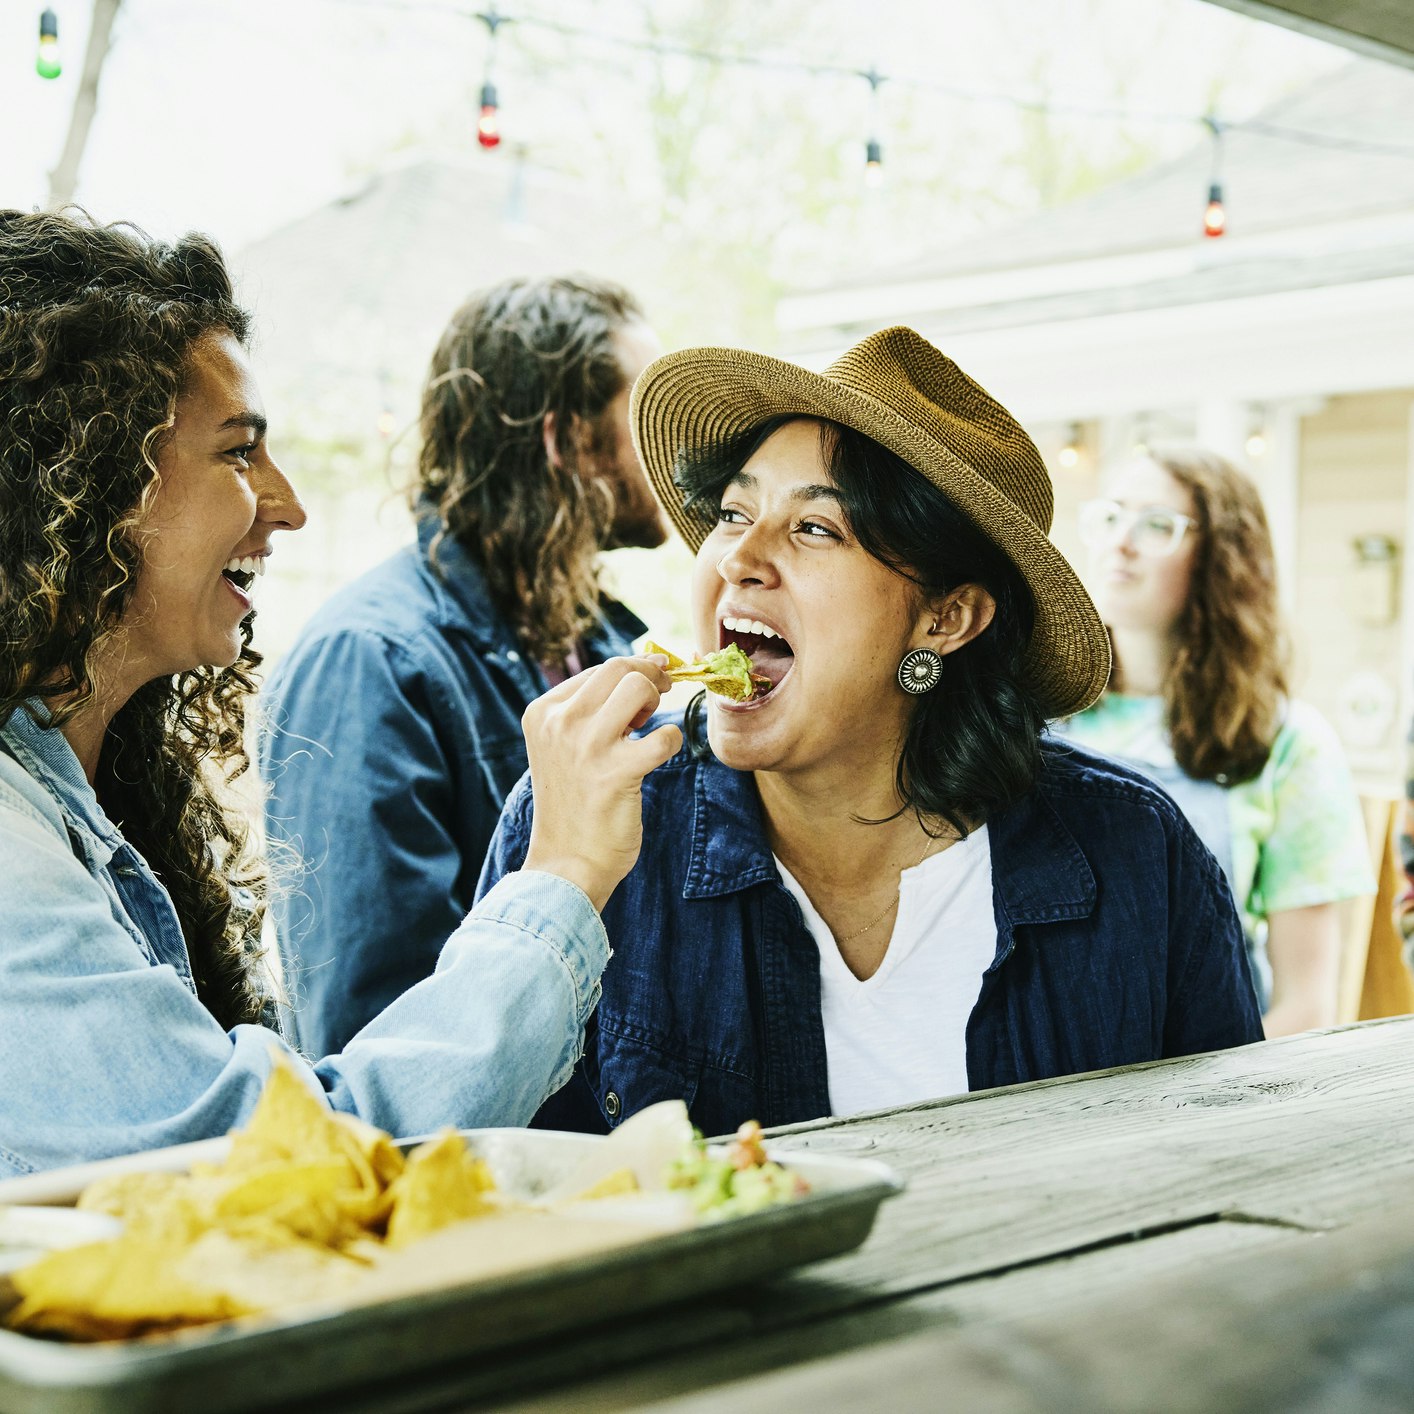 A laughing woman feeds her partner a tortilla chip heaped with guacamole at a food truck